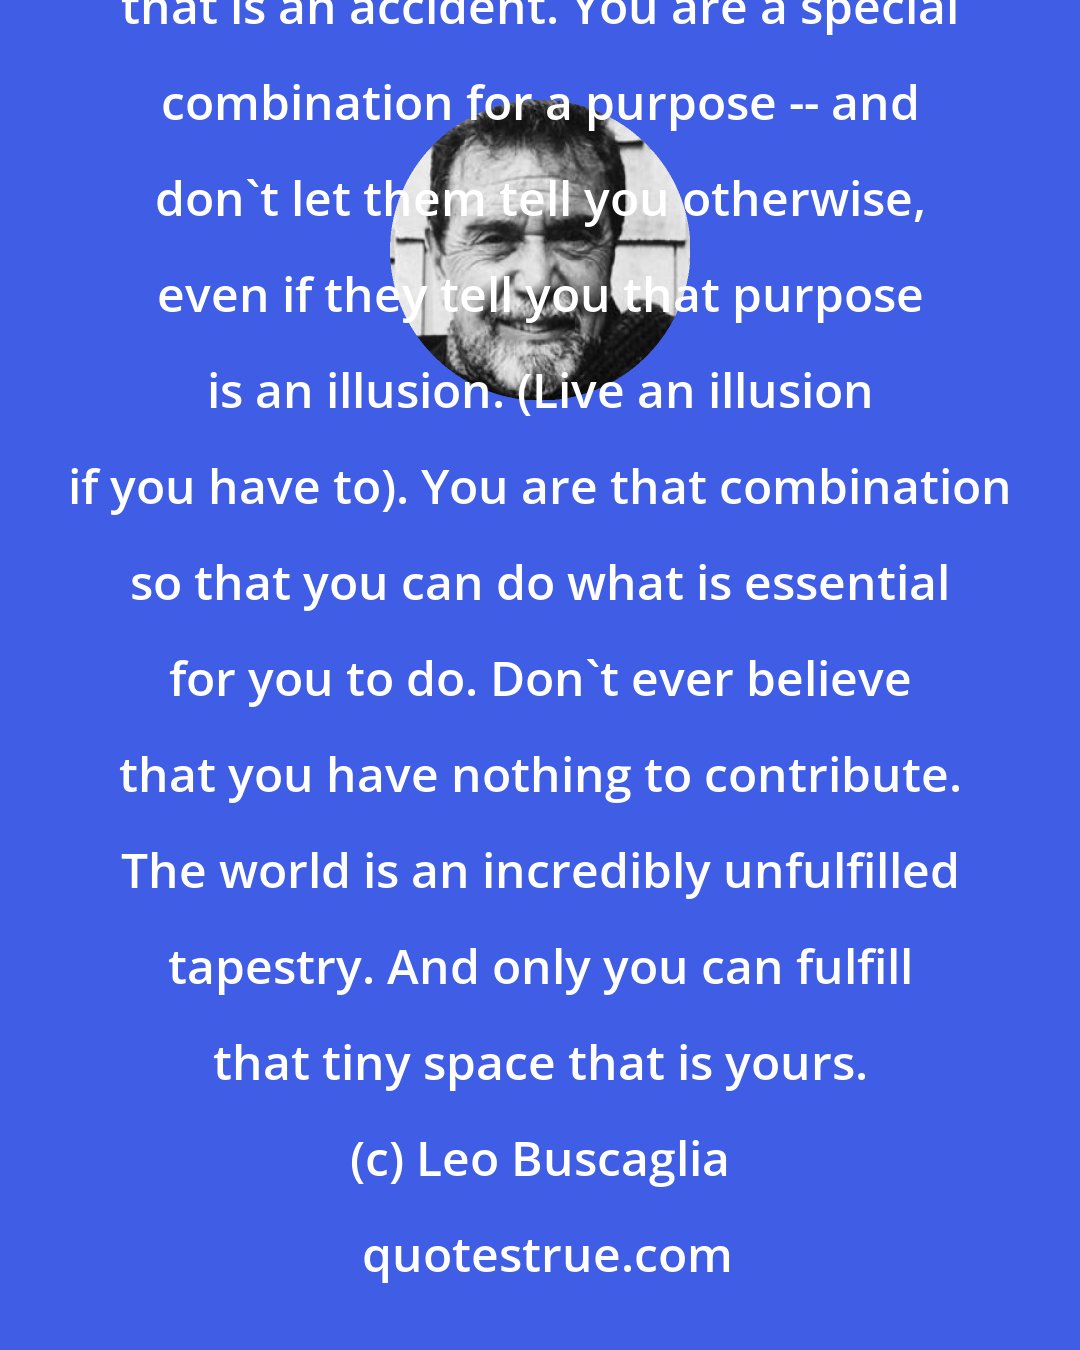 Leo Buscaglia: A wonderful realization will be the day you realize that you are unique in all the world. There is nothing that is an accident. You are a special combination for a purpose -- and don't let them tell you otherwise, even if they tell you that purpose is an illusion. (Live an illusion if you have to). You are that combination so that you can do what is essential for you to do. Don't ever believe that you have nothing to contribute. The world is an incredibly unfulfilled tapestry. And only you can fulfill that tiny space that is yours.